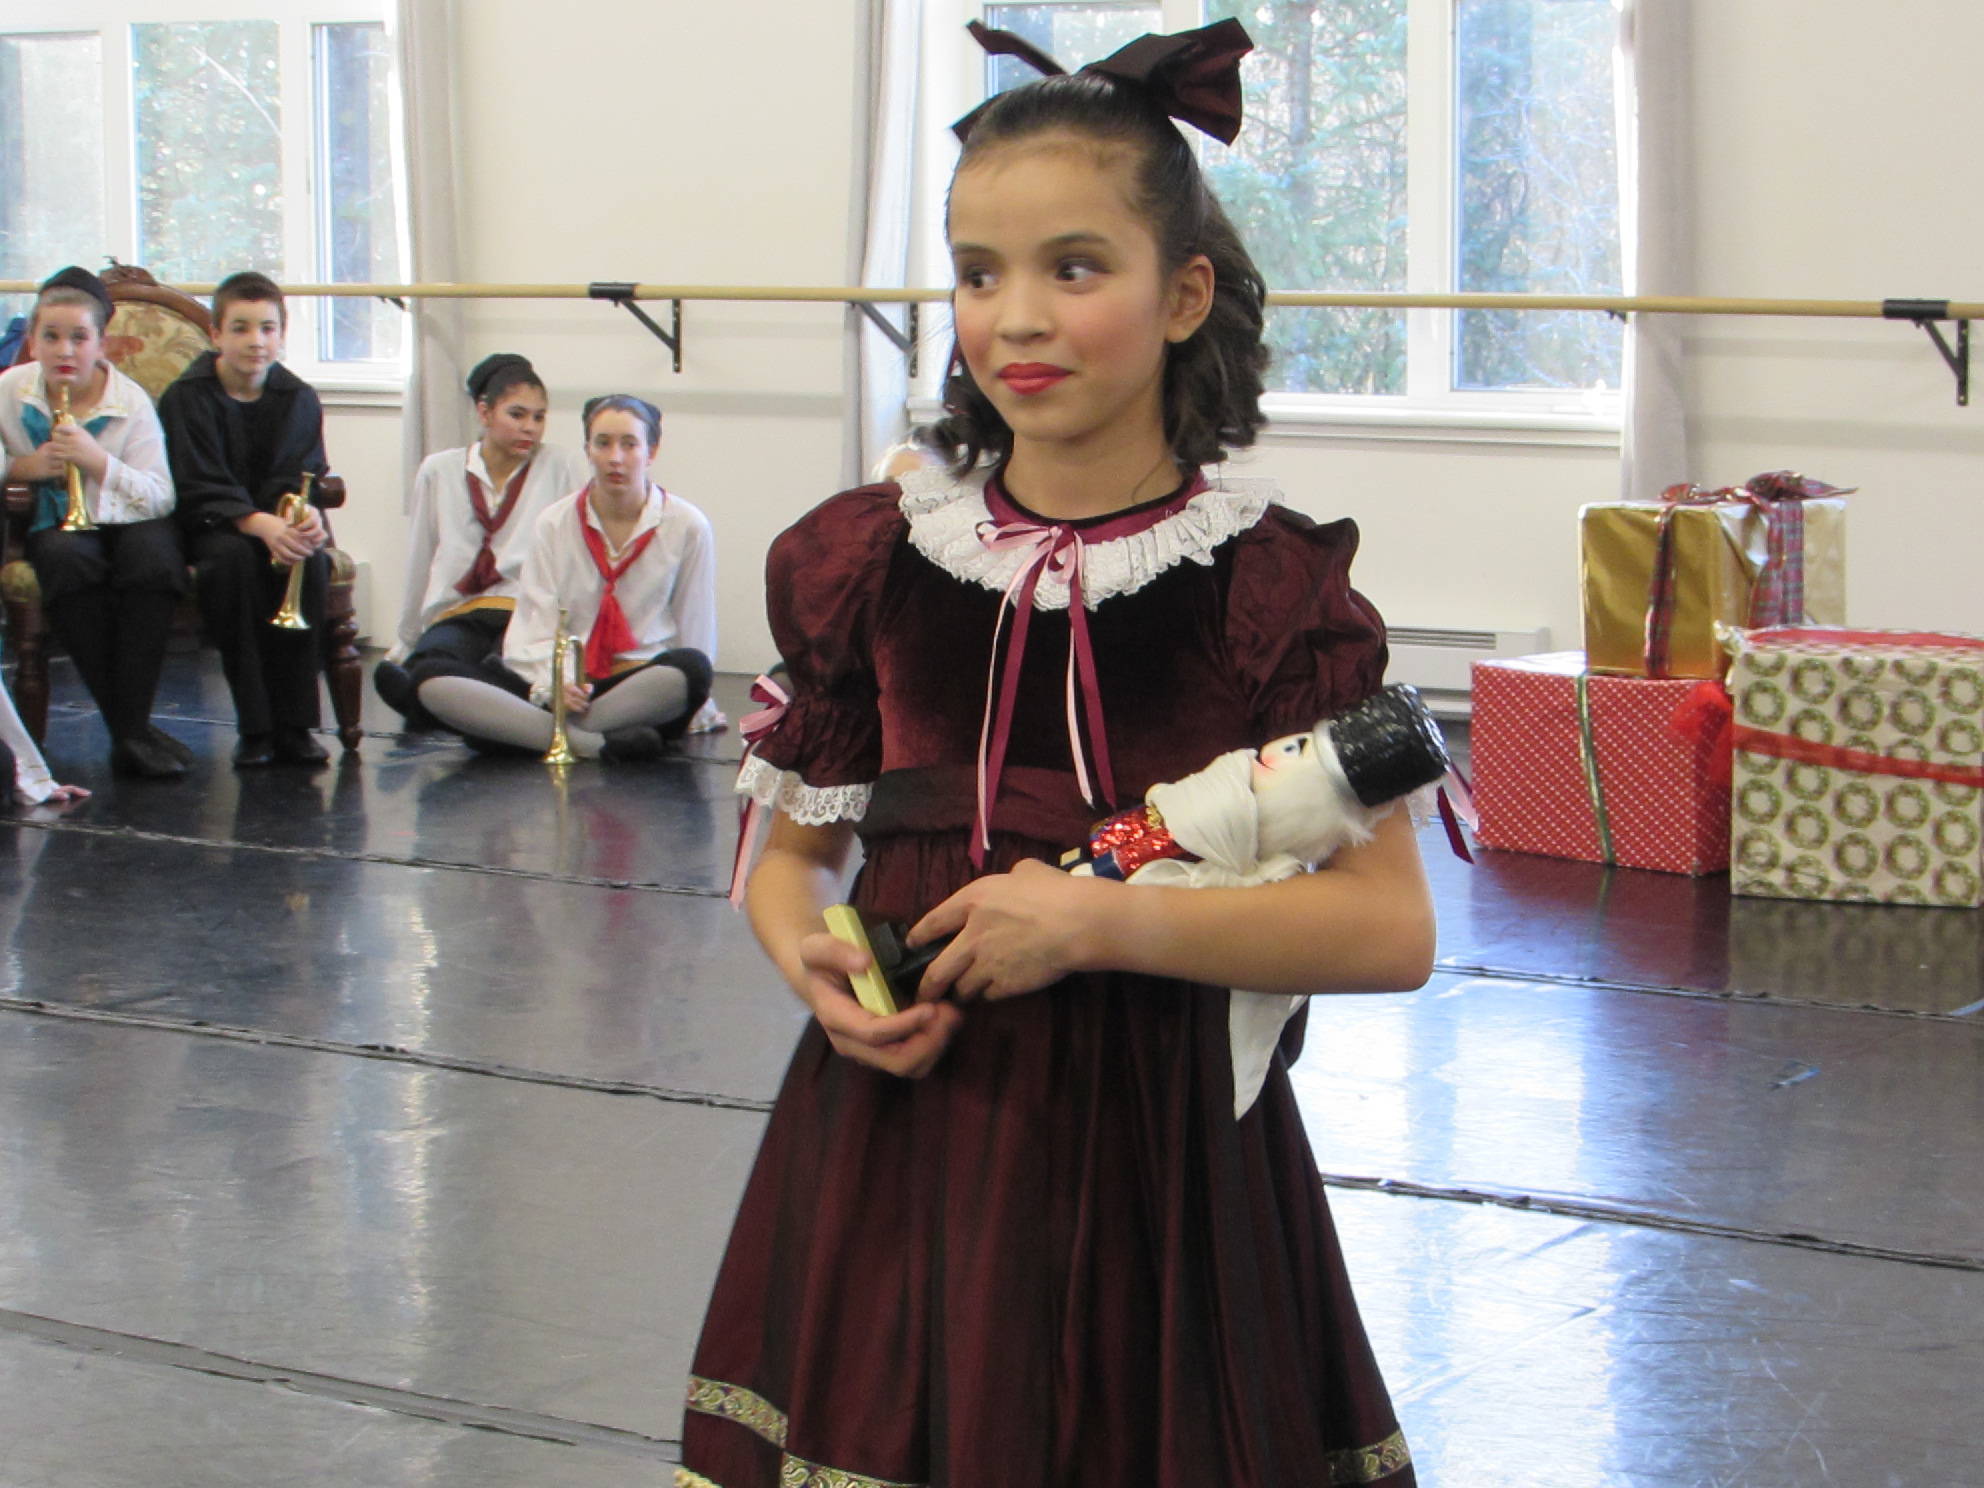 Isabel Danner carries a nutcracker during rehearsal for “The Nutcracker” Saturday, Dec. 1 at Juneau Dance Theatre. (Ben Hohenstatt | Capital City Weekly)